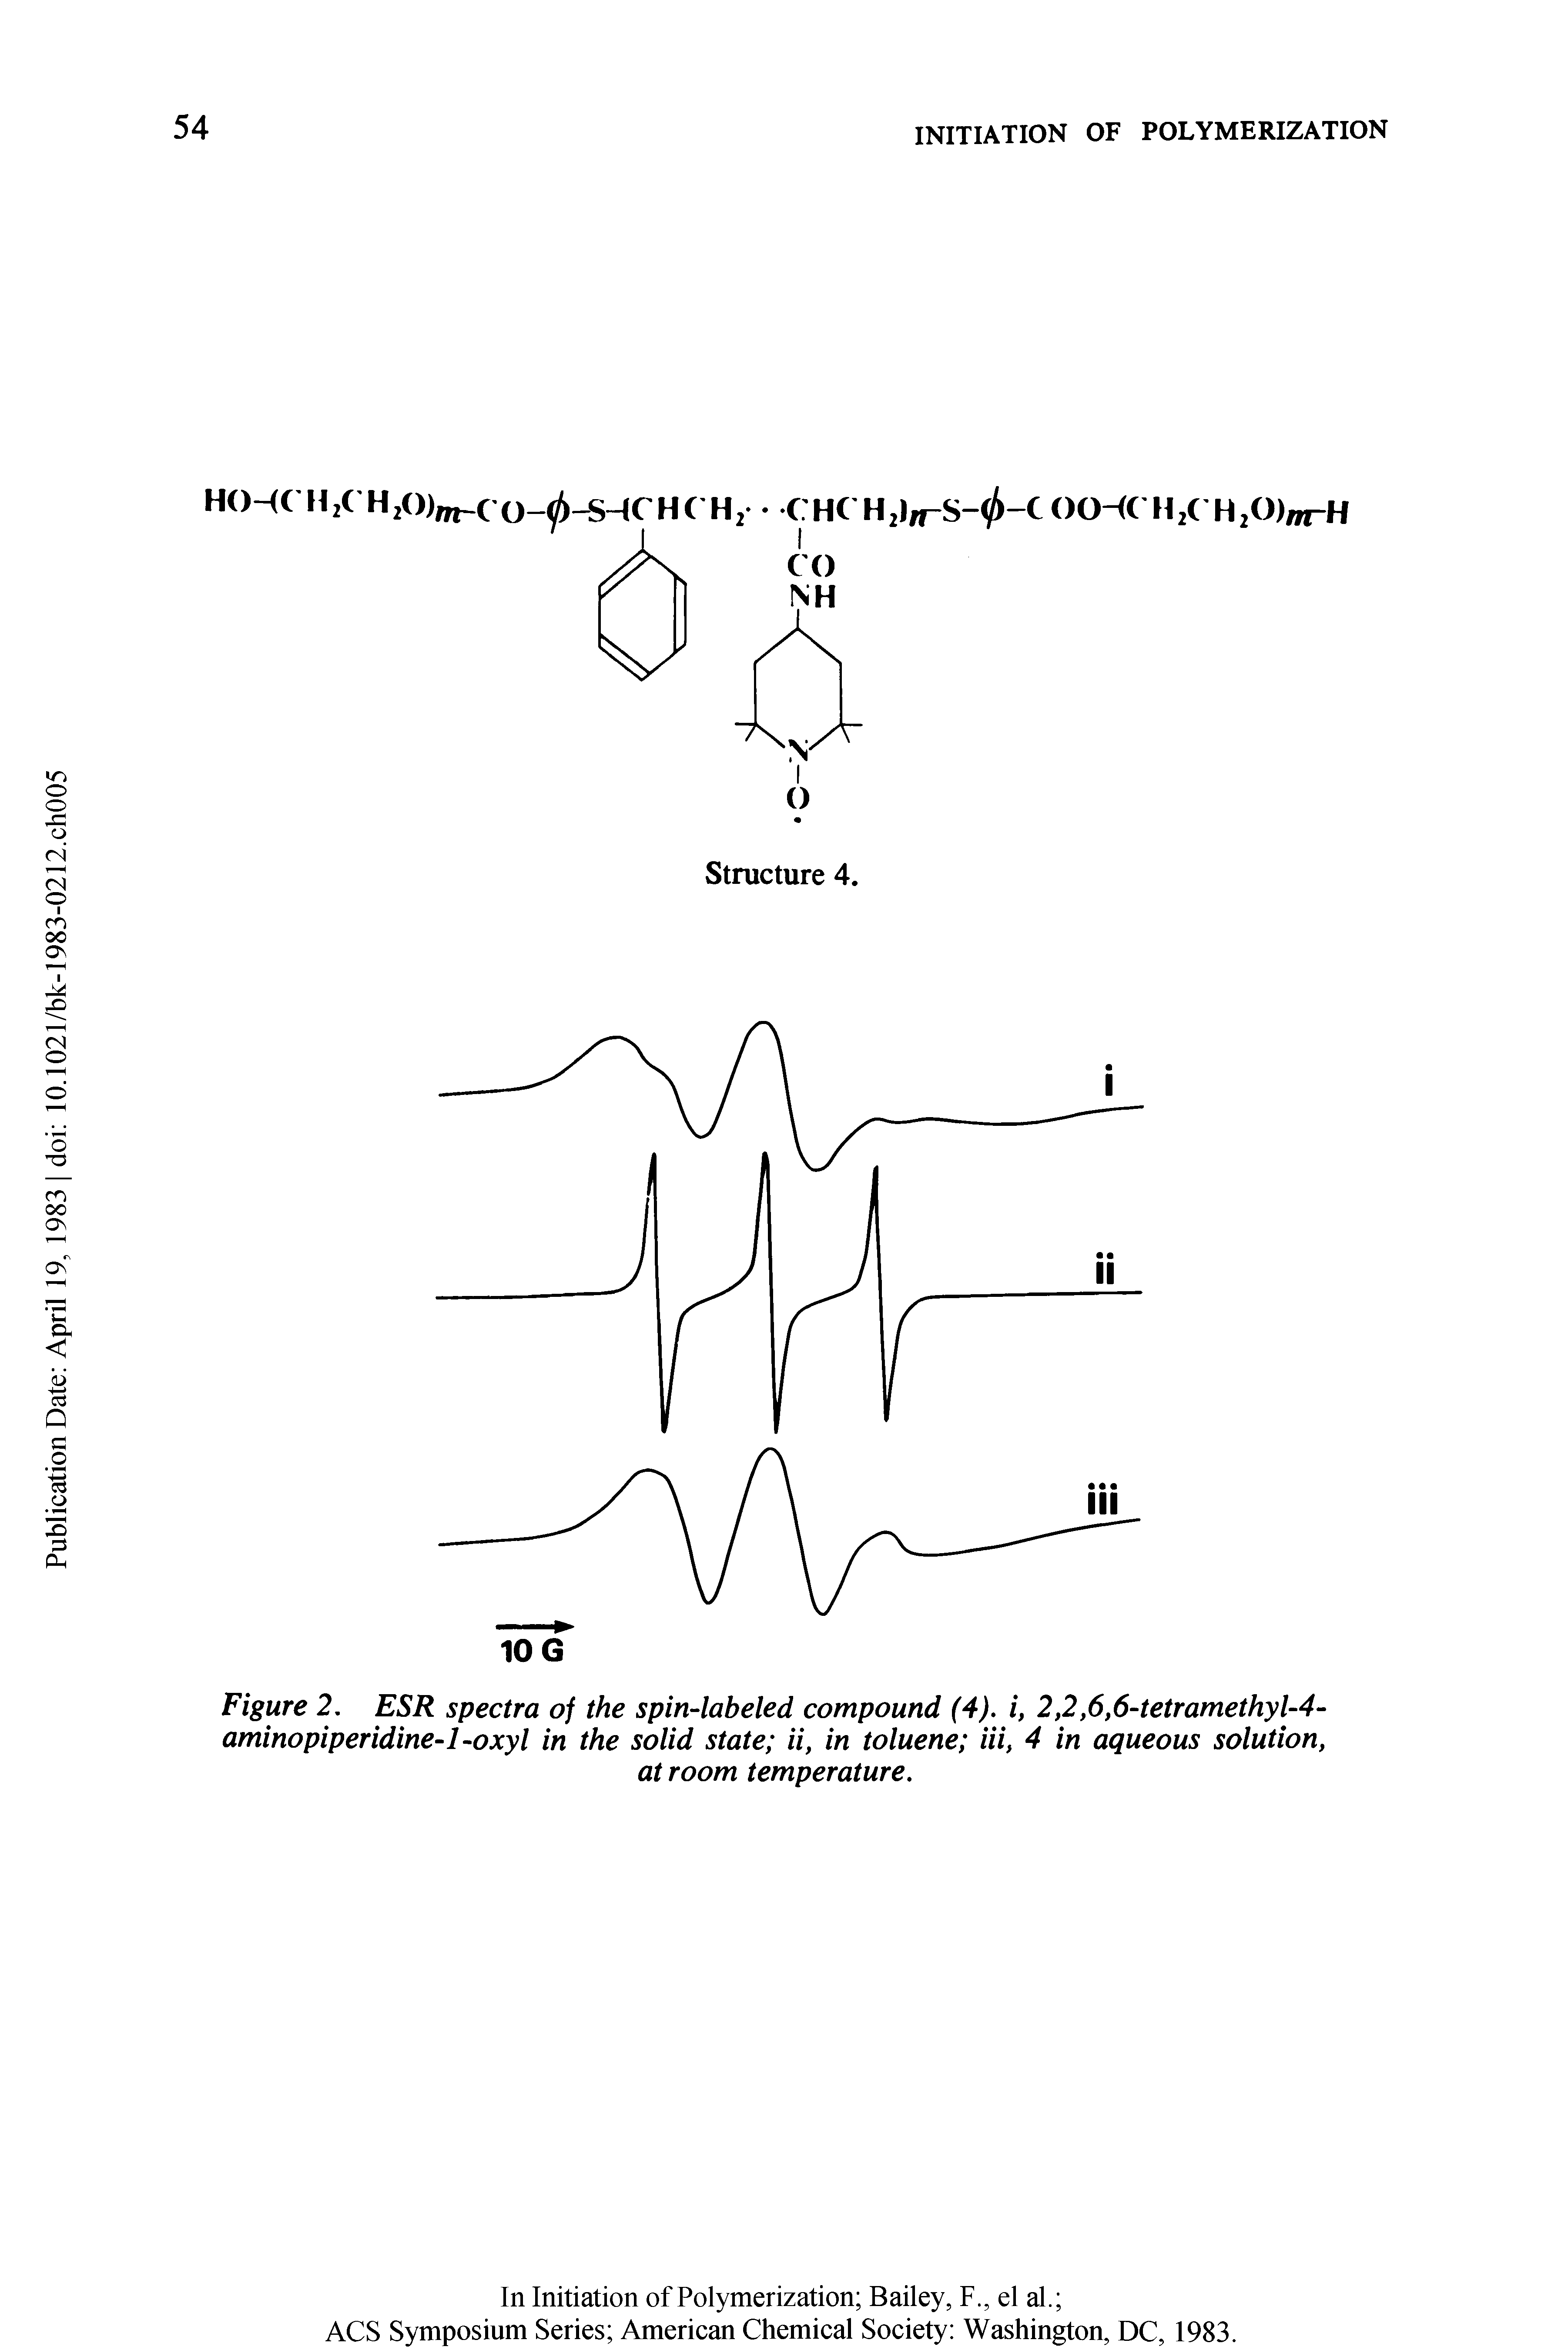 Figure 2, ESR spectra of the spin-labeled compound (4). i, 2,2,6,6-tetramethyl-4-aminopiperidine-1 -oxyl in the solid state ii, in toluene Hi, 4 in aqueous solution,...